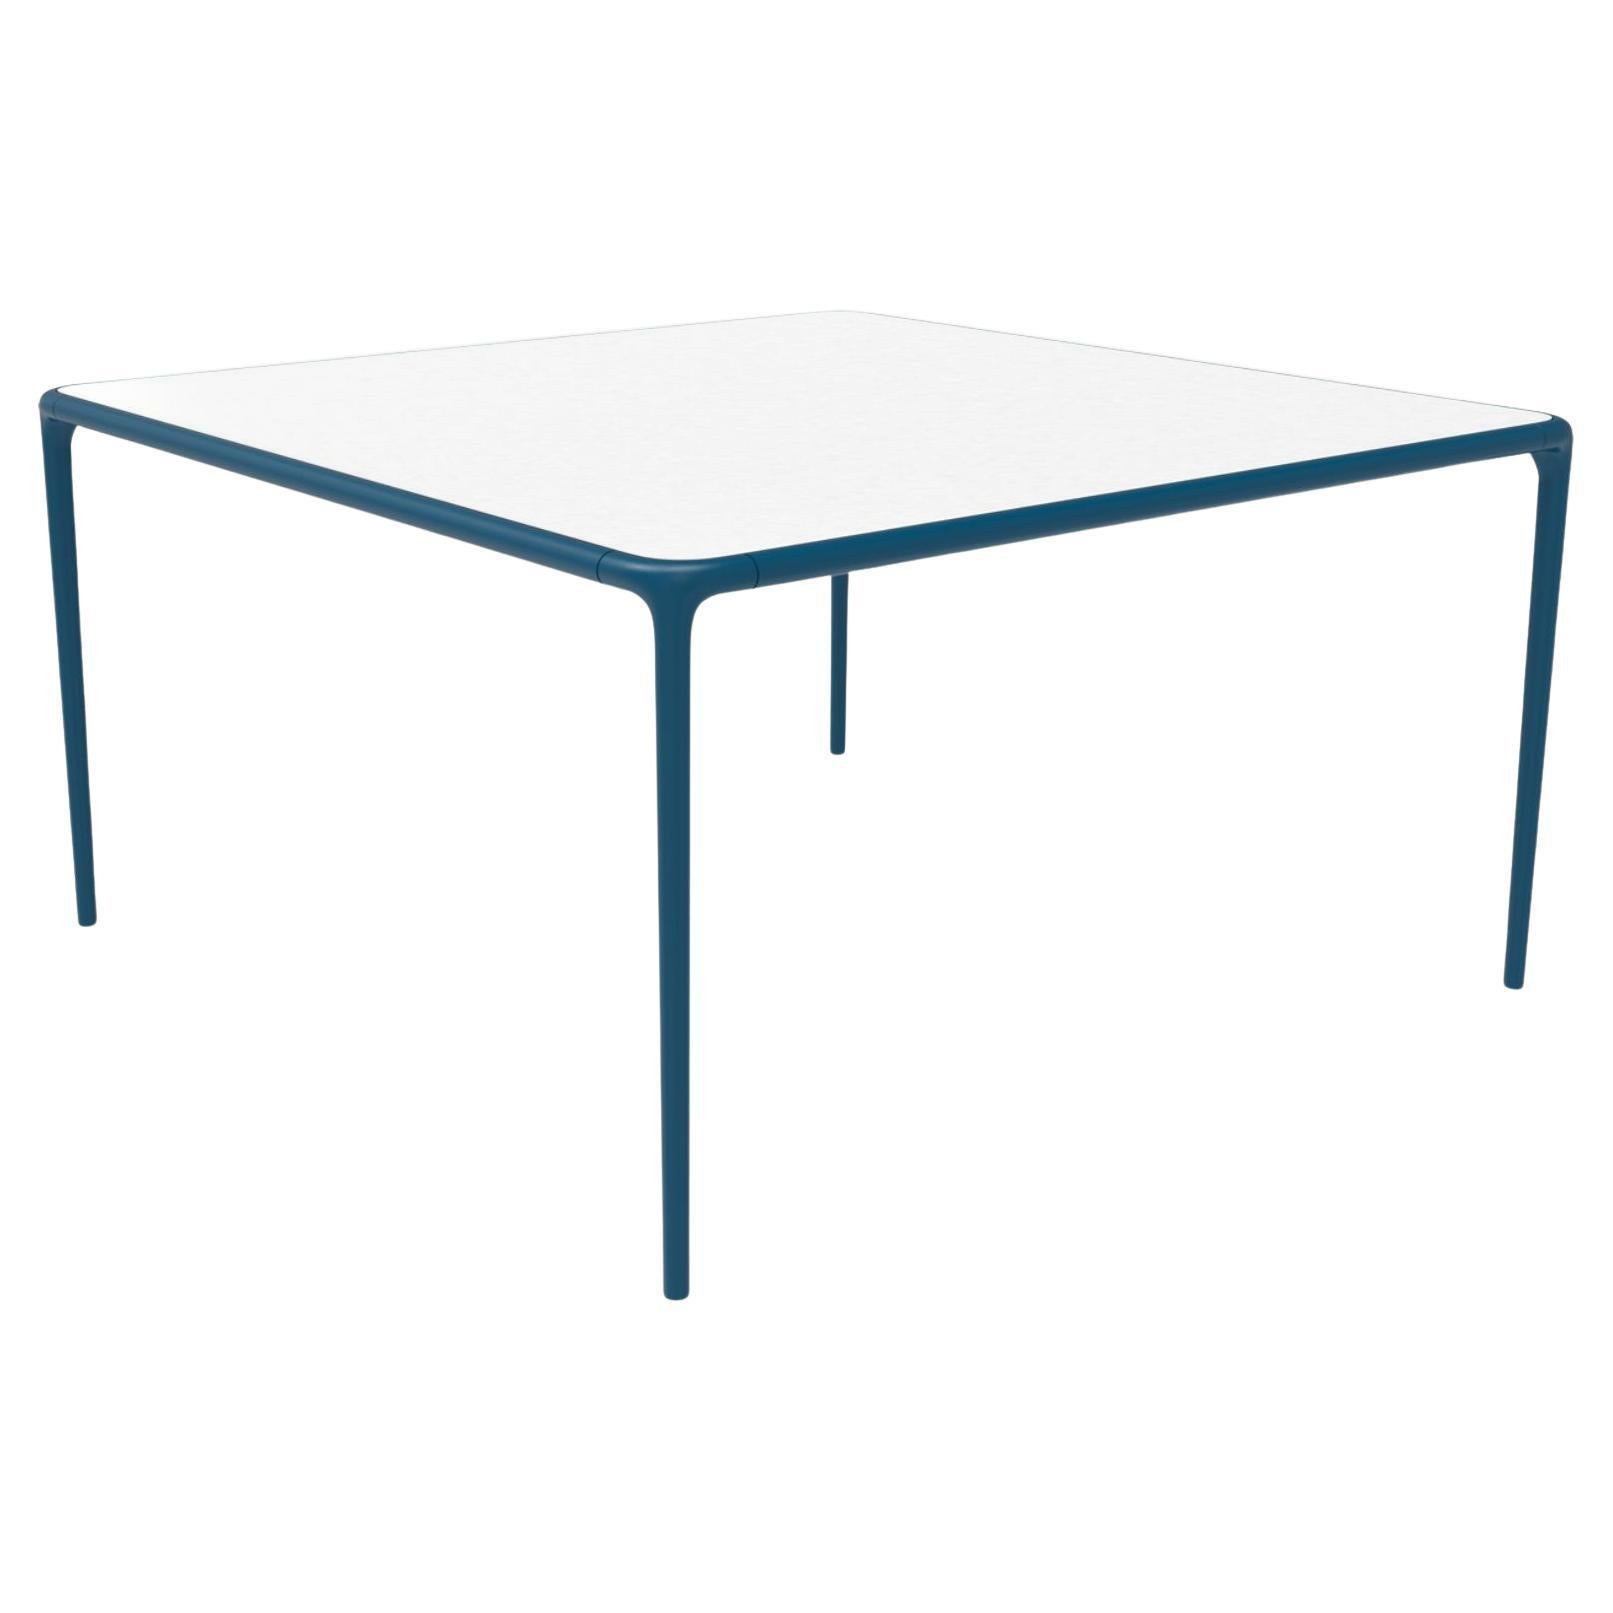 Xaloc Navy Glass Top Table 140 by Mowee For Sale